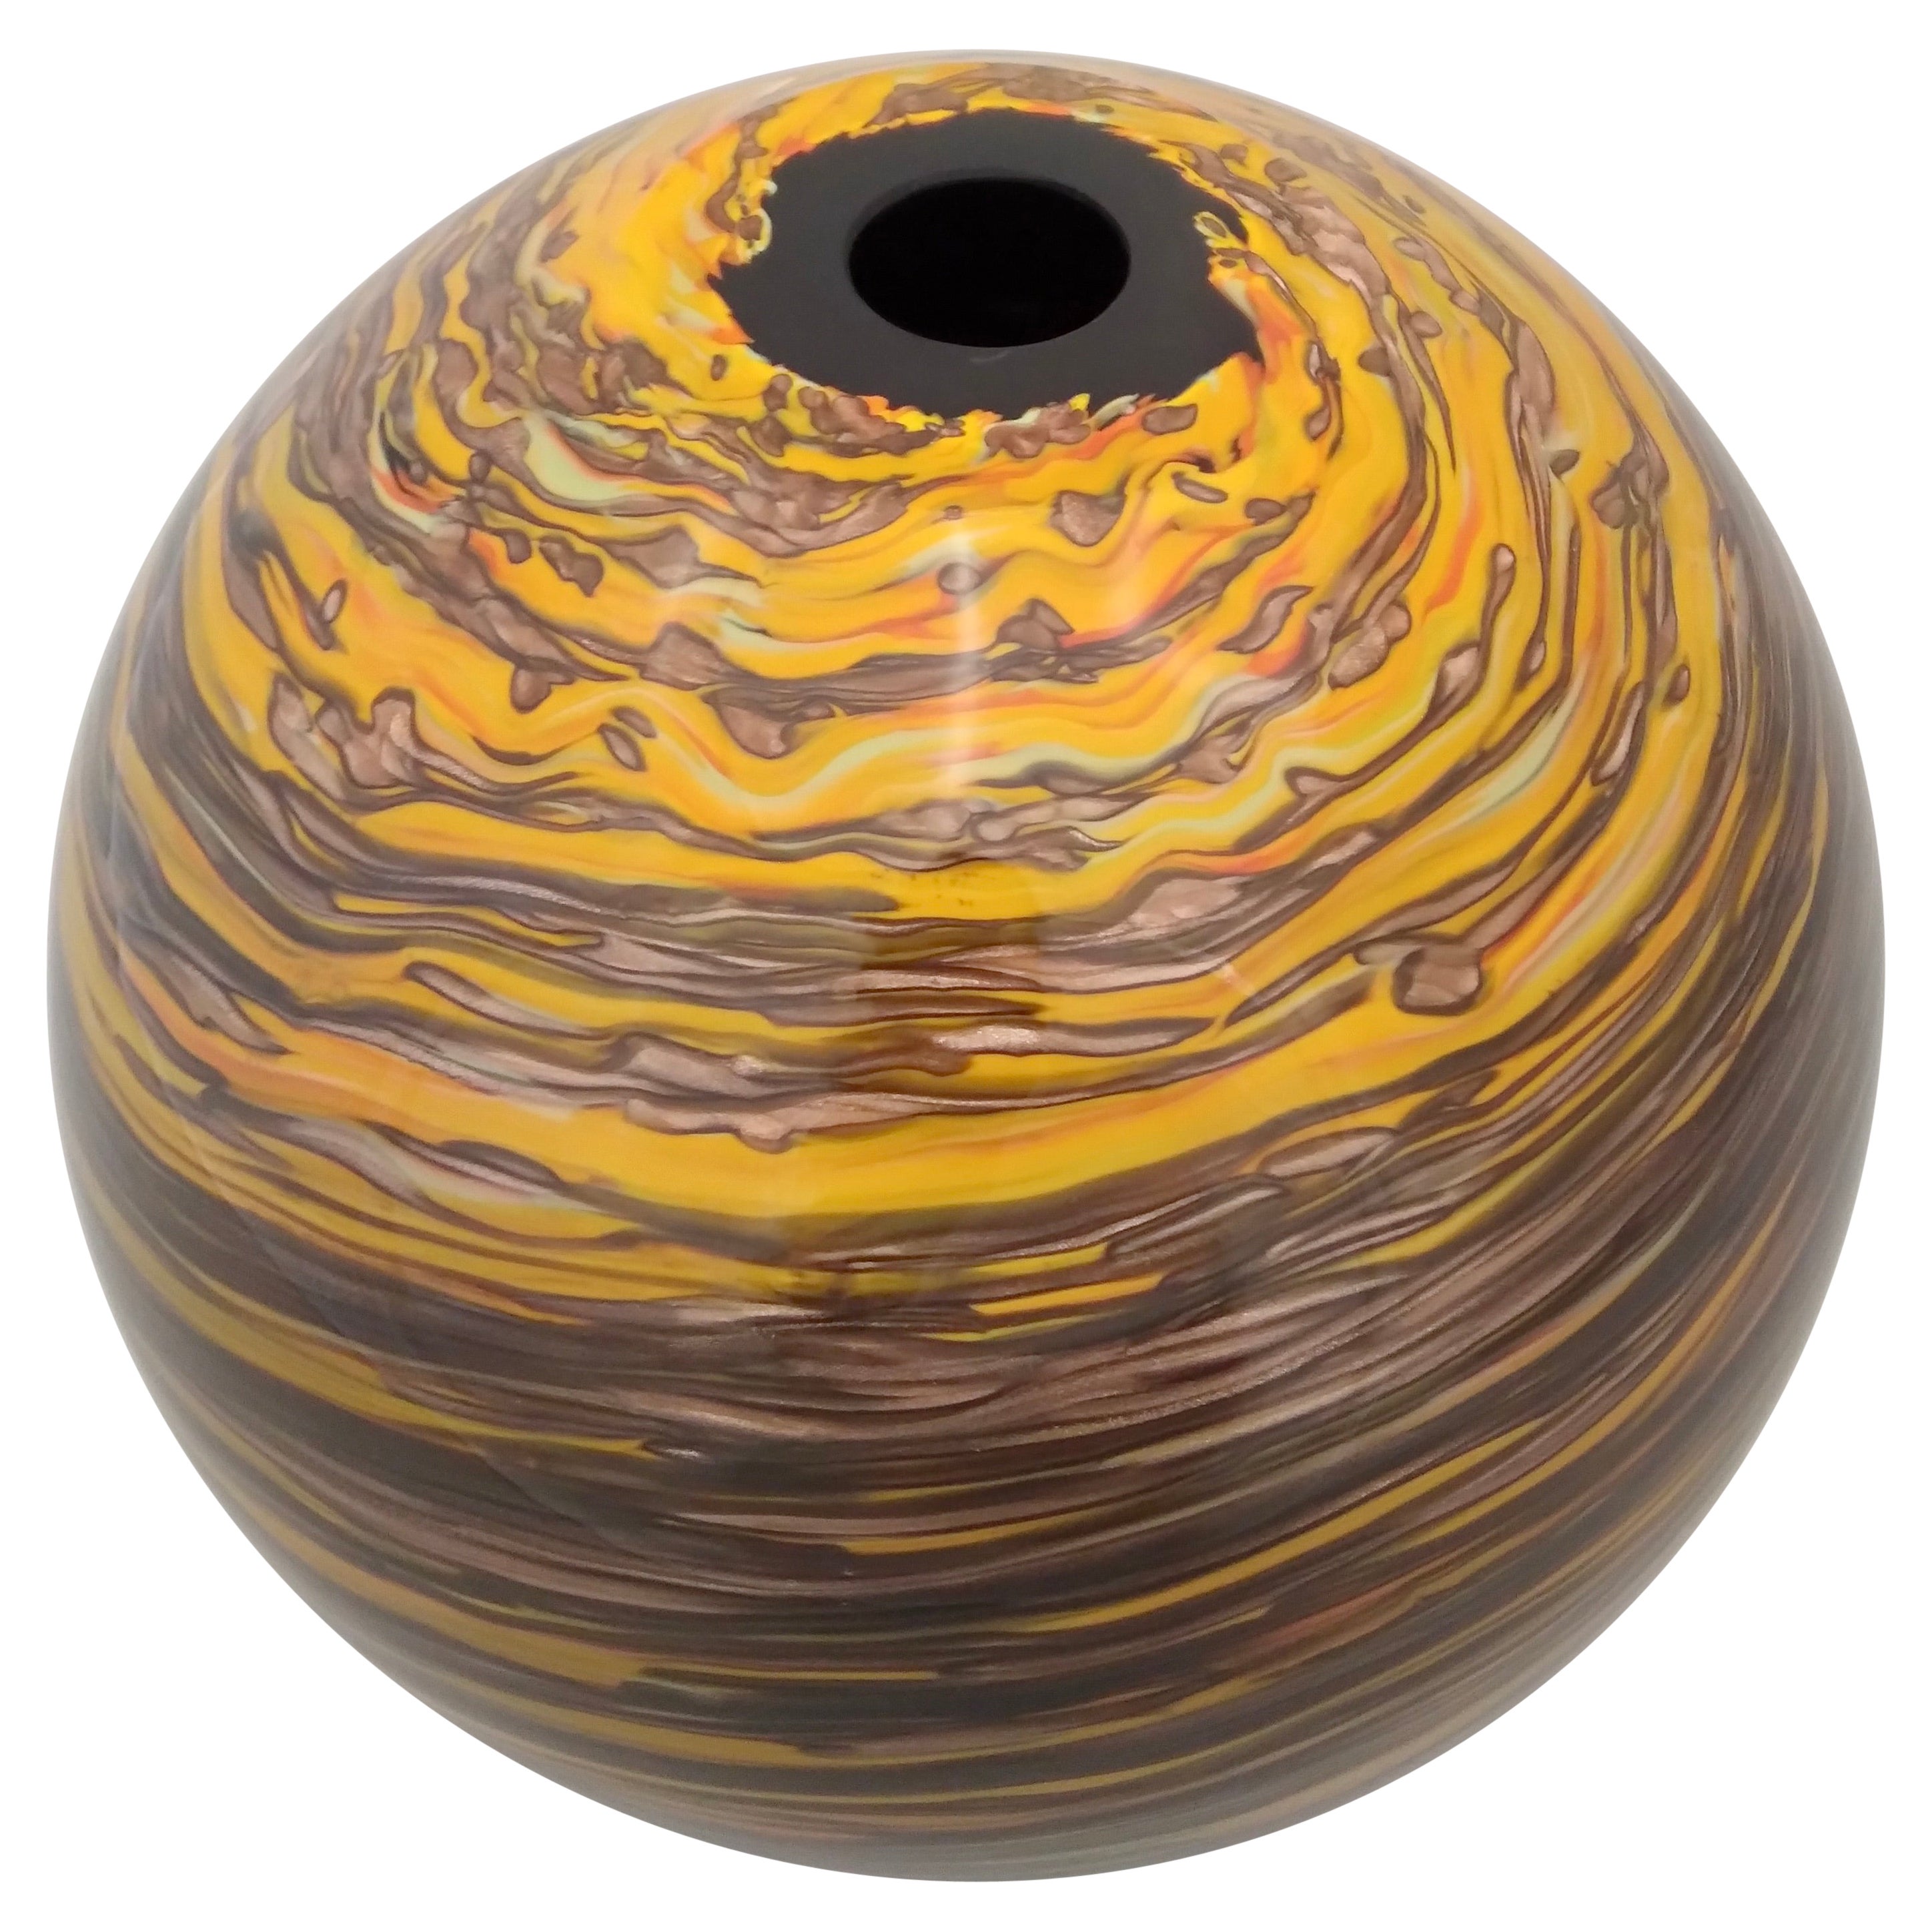 Formia 1980s Modern Round Brown Yellow Red Orange Gold Murano Glass Vase For Sale